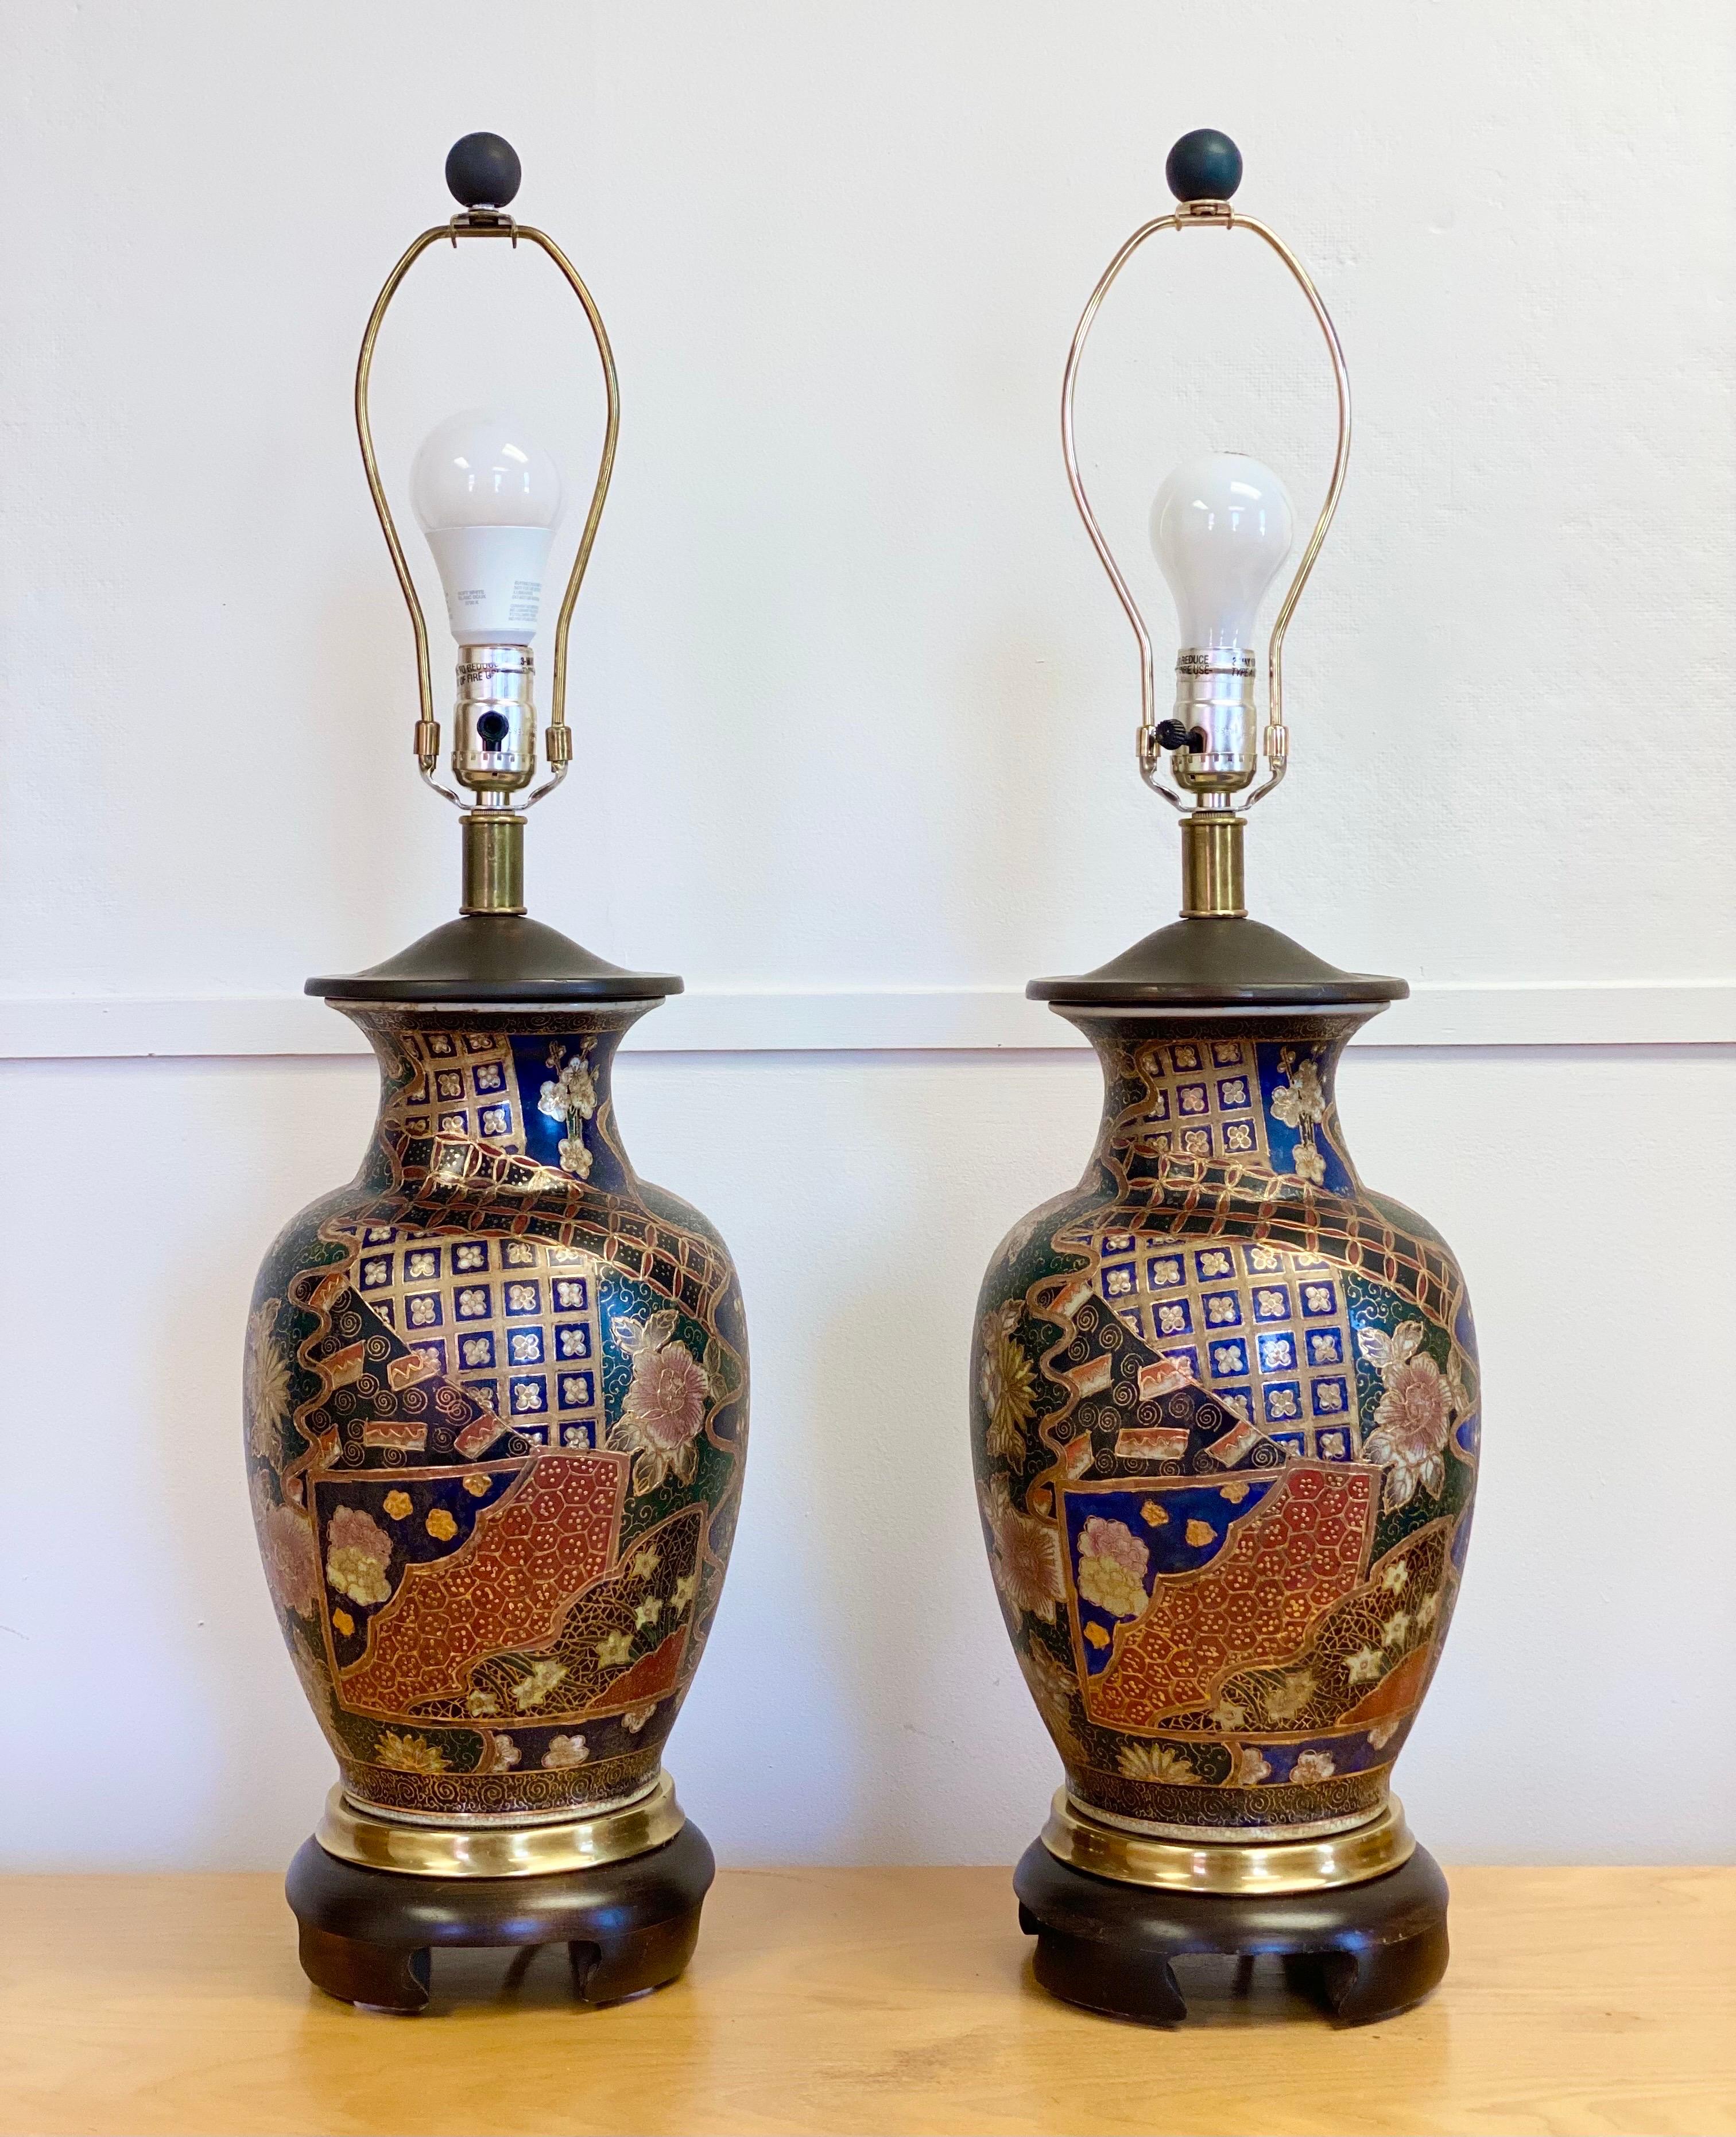 We are very pleased to offer a stunning pair of Chinese table lamps by Frederick Cooper circa the 1960s. Through mixing the media of brass, fabric, glass and wood, Cooper created exquisitely designed lamps that matched the rapid innovation of